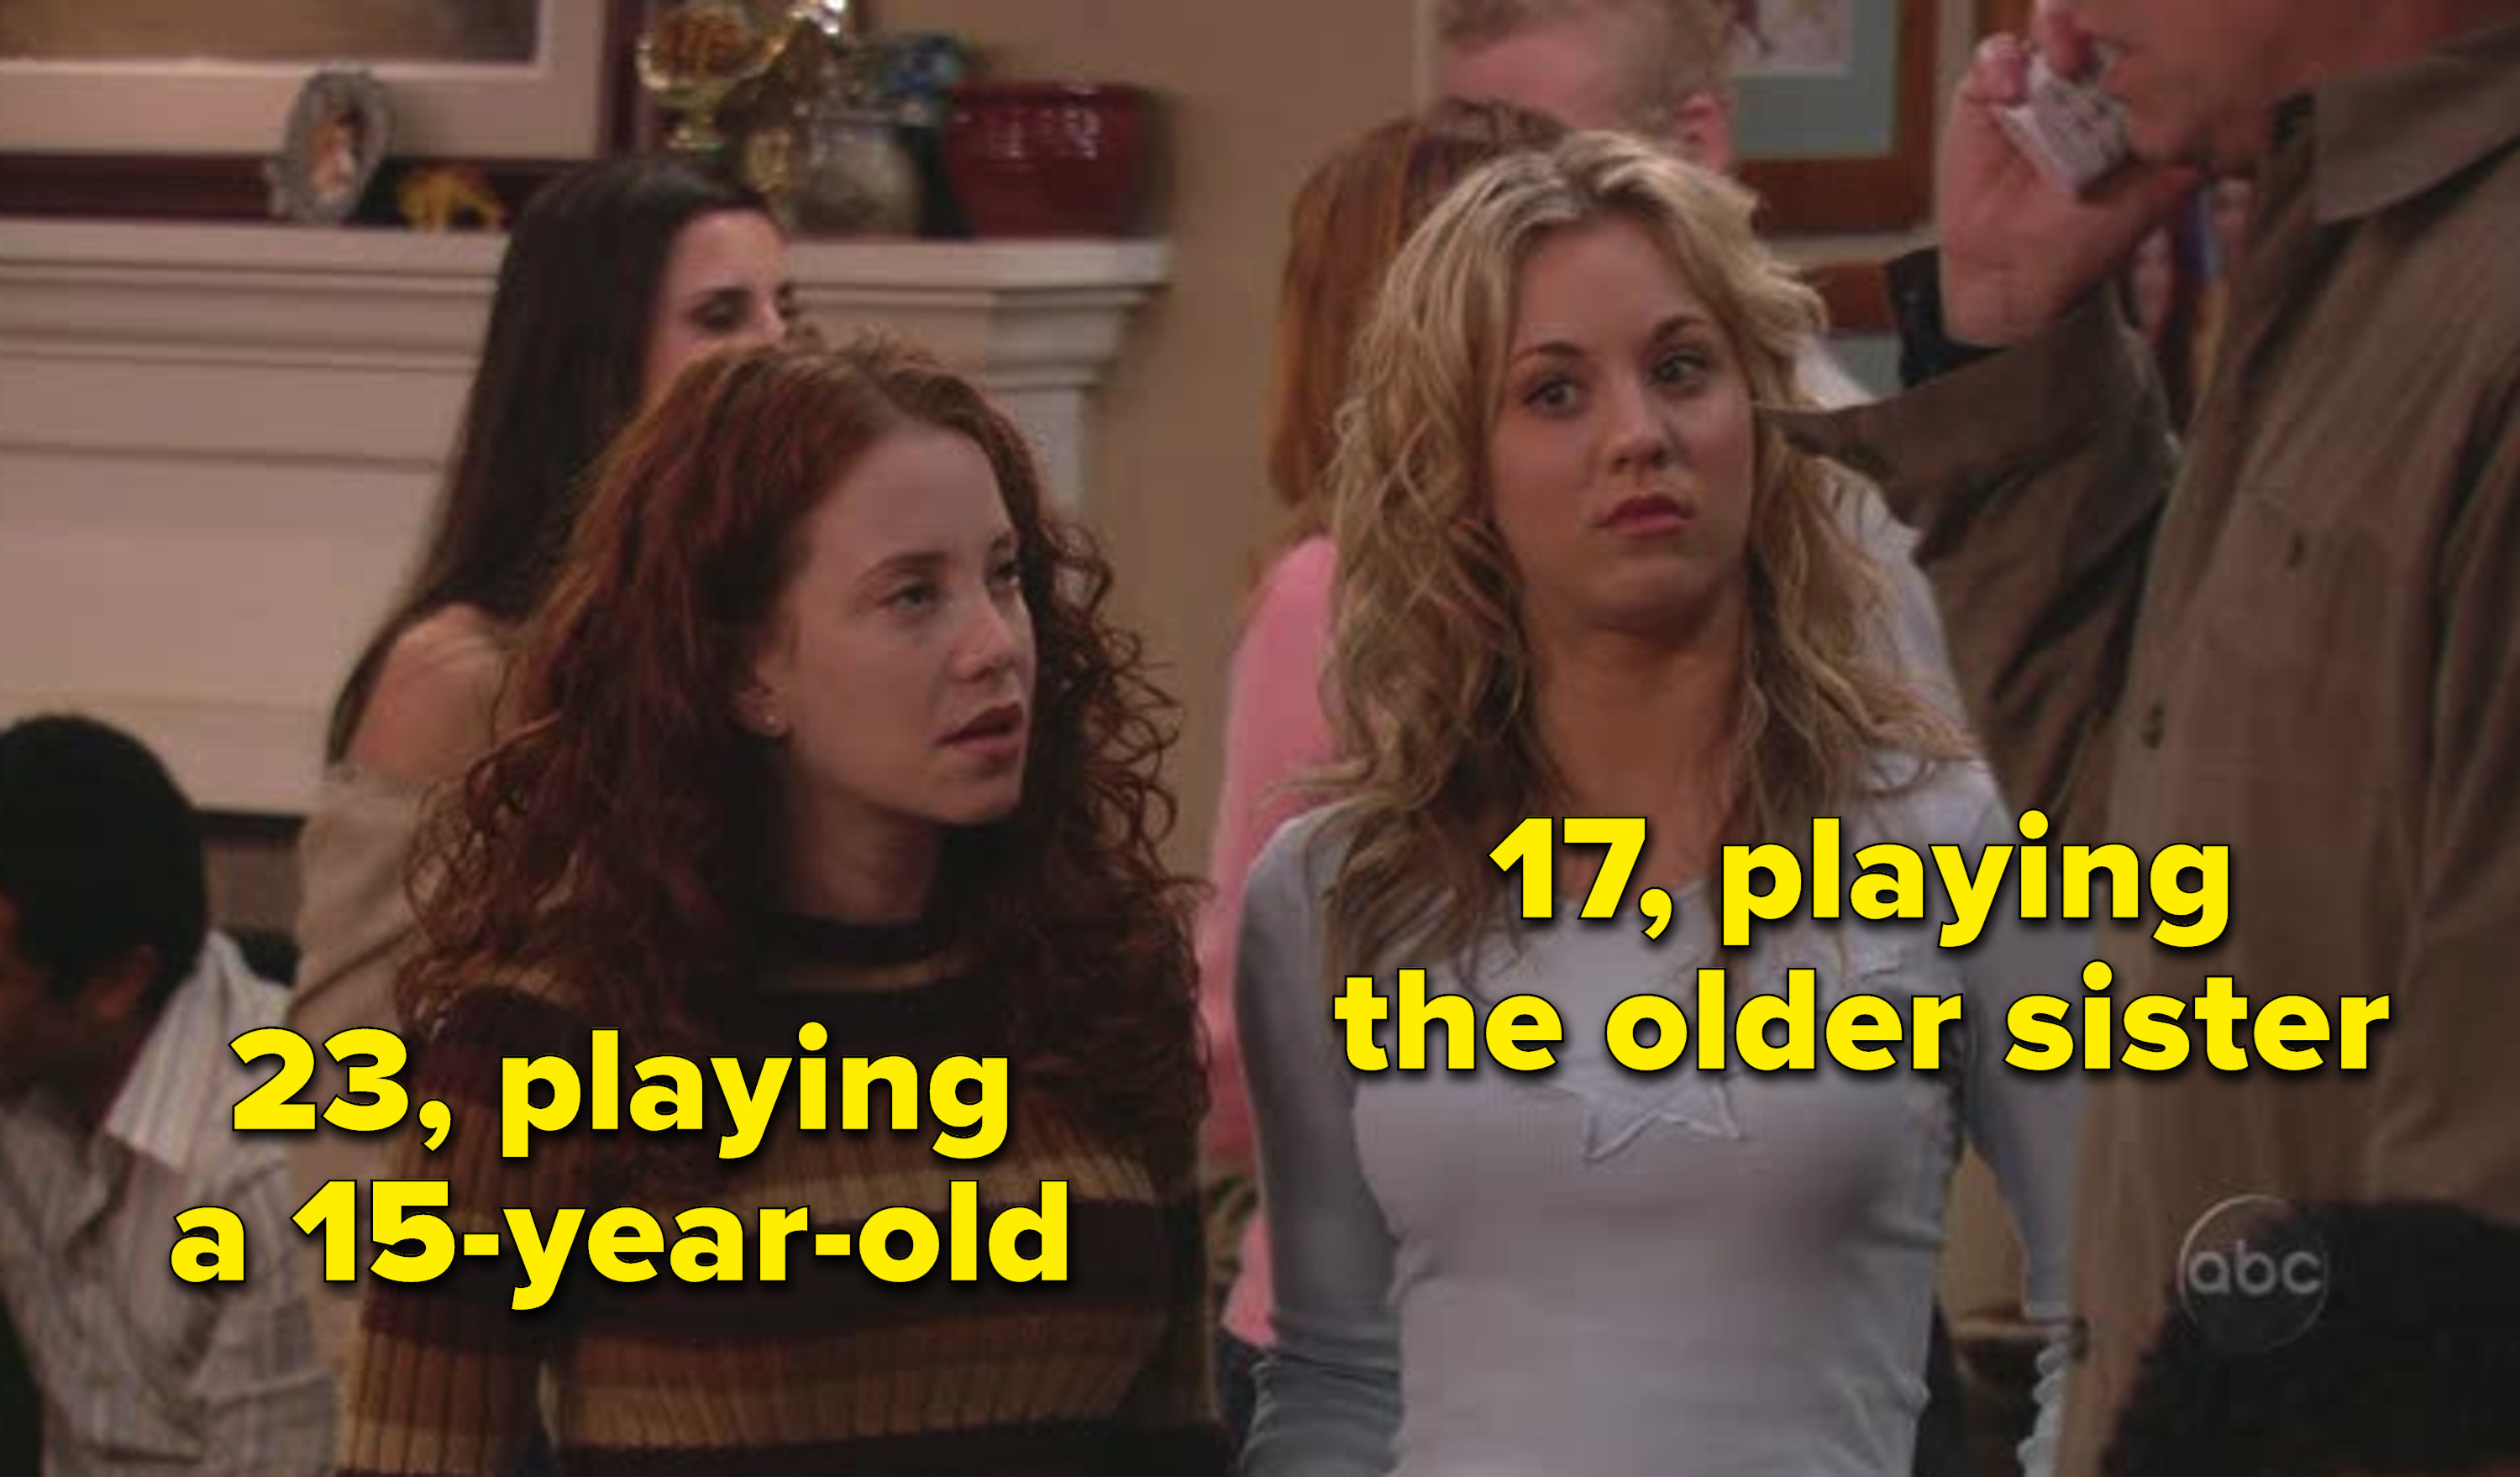 Amy at 23 playing a 15-year-old and Kaley at 17 playing a 17 year old